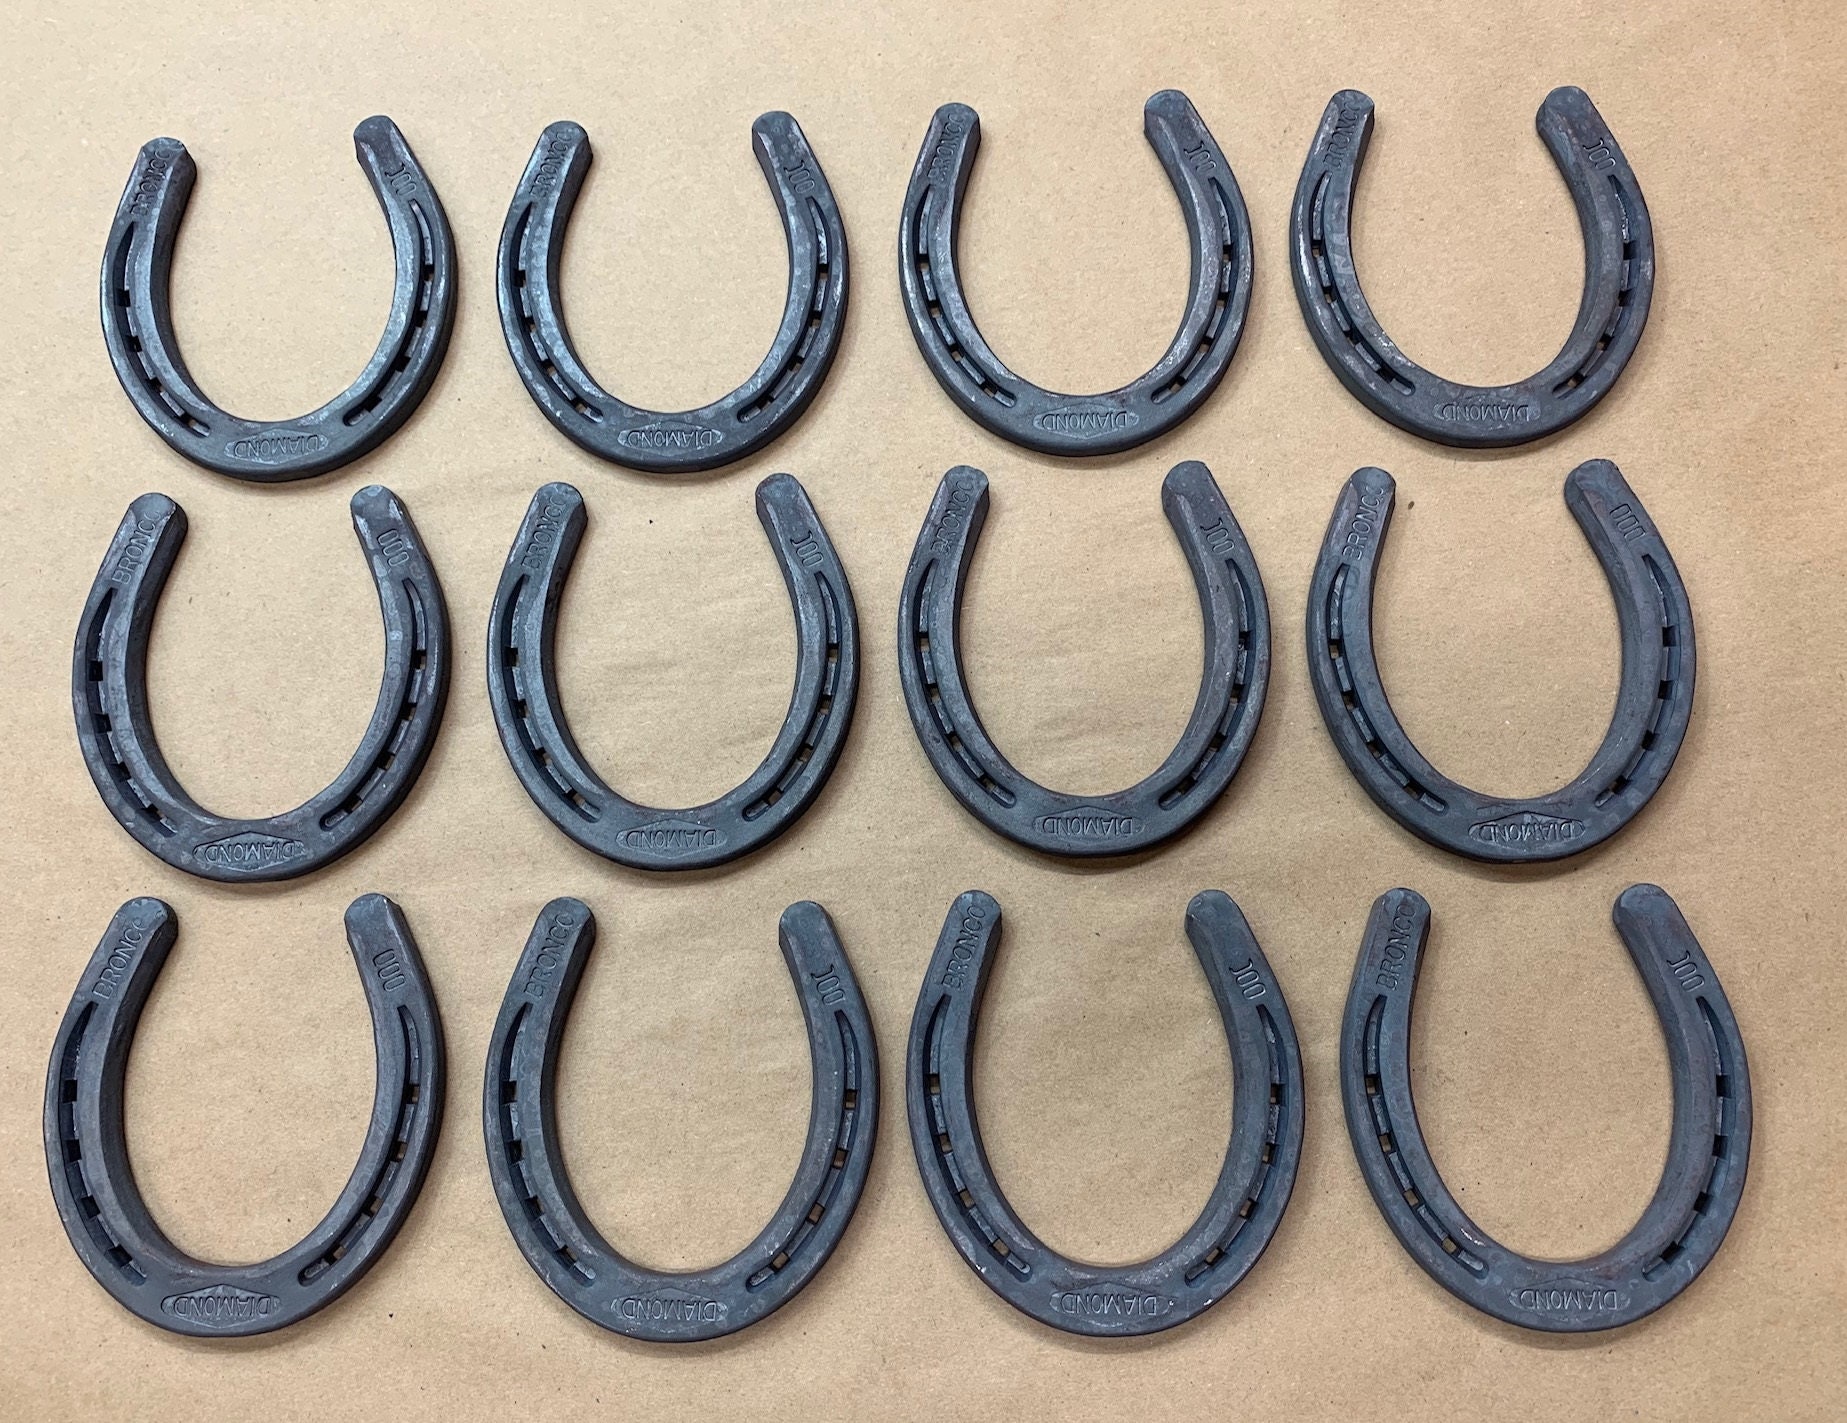 The Different Types Of Horseshoes